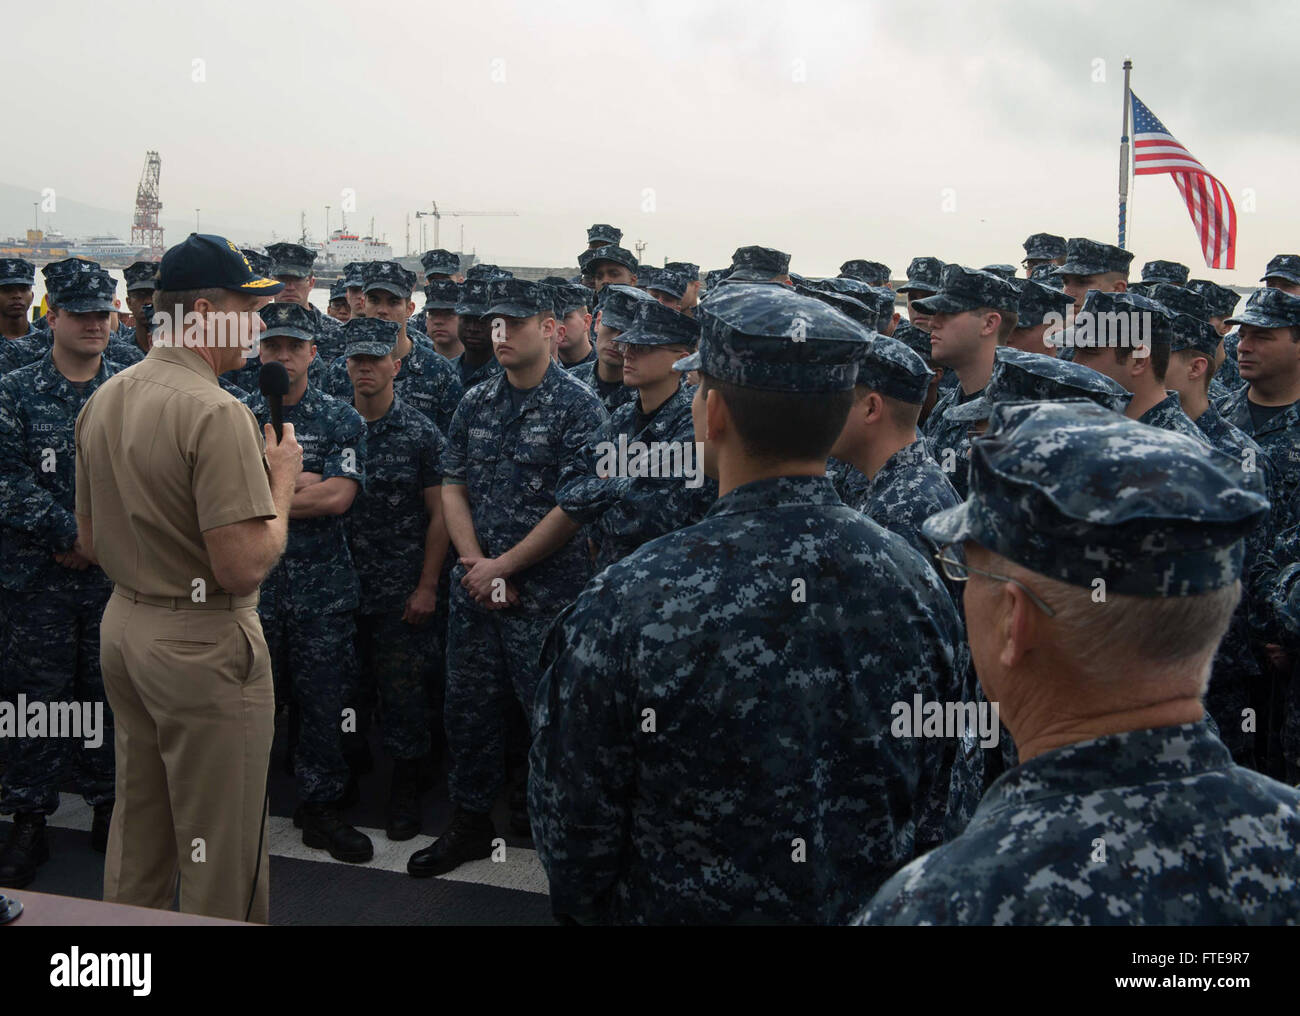 140211-N-SK590-096: NAPLES, Italy (Feb. 11, 2014) - Vice Adm. Phil Davidson, commander, U.S. 6th Fleet, addresses the crew of the Oliver Hazard Perry-class guided-missile frigate USS Elrod (FFG 55) during the ship’s port visit to Naples. Elrod is on a scheduled deployment supporting maritime security operations and theater security cooperation efforts in the U.S. 6th Fleet area of operations. (U.S. Navy photo by Mass Communication Specialist 2nd Class Tim D. Godbee/Released)  Join the conversation on Twitter ( https://twitter.com/naveur navaf )  follow us on Facebook ( https://www.facebook.com Stock Photo